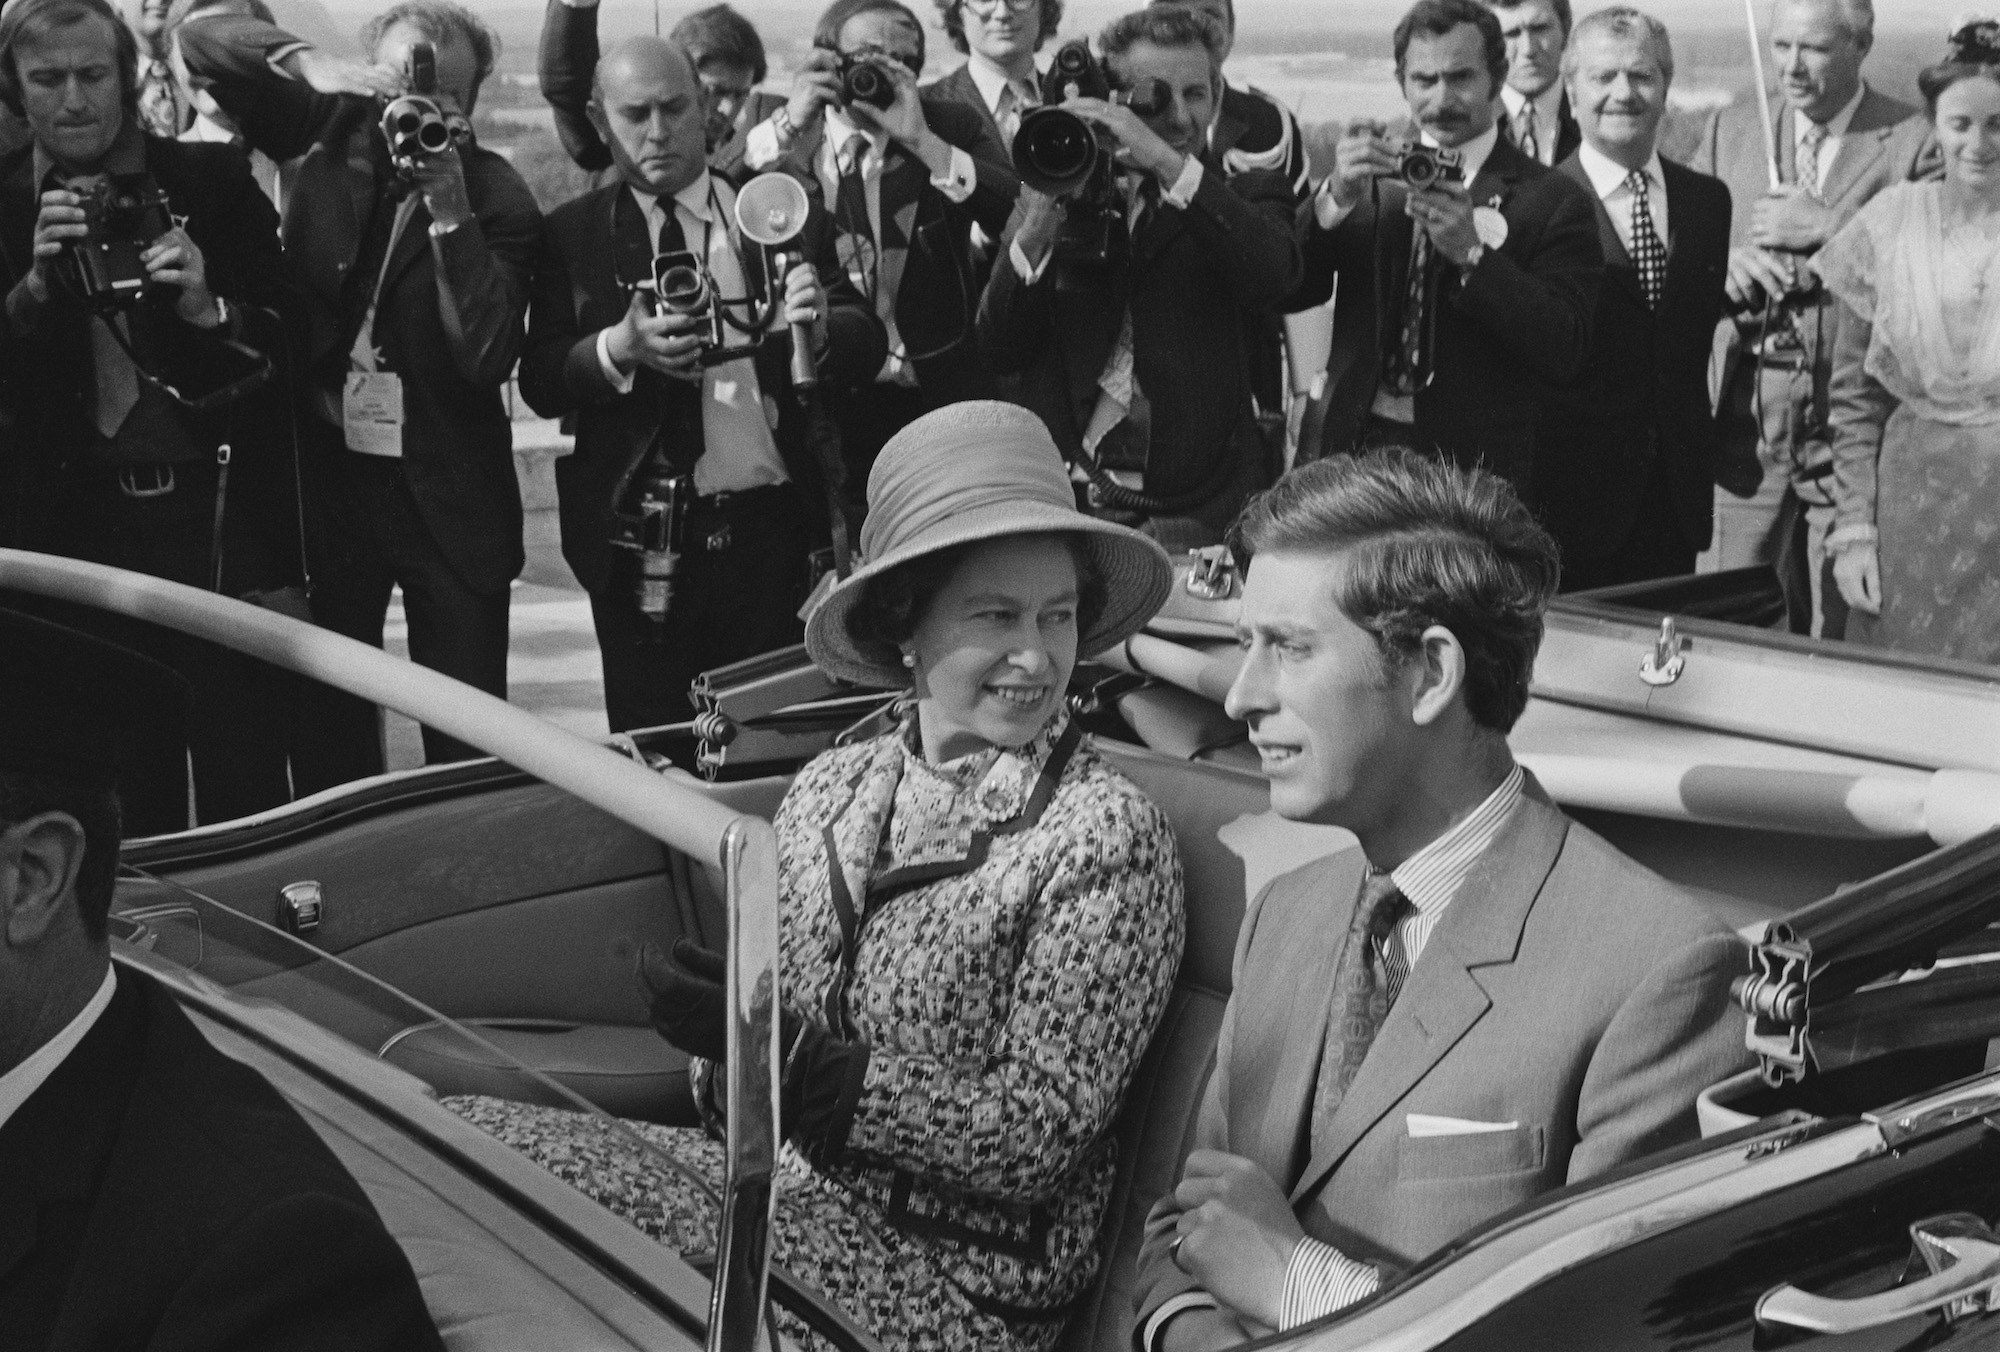 Queen Elizabeth II and Prince Charles travel in an open top car in Avignon